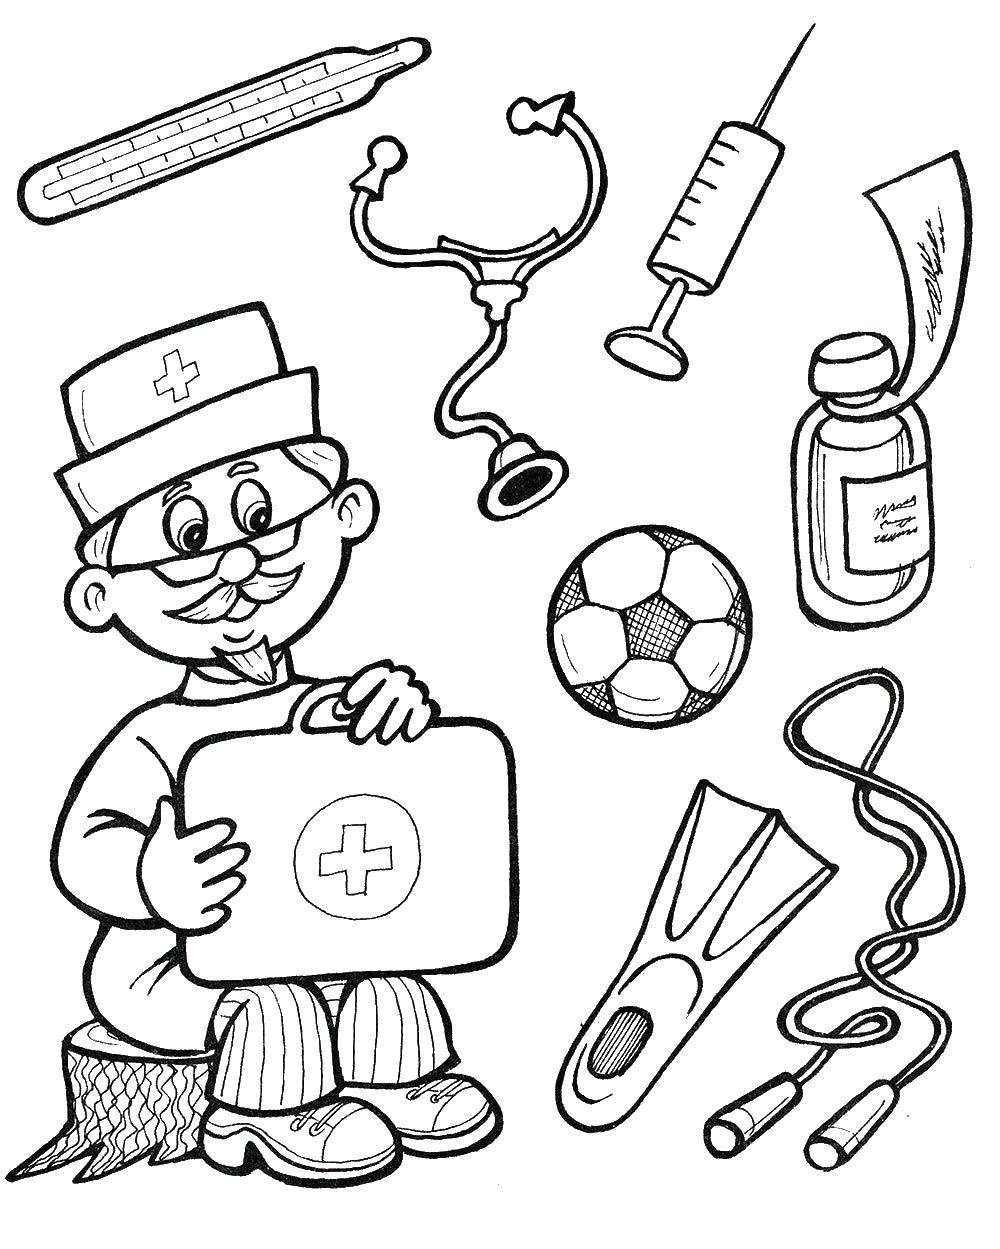 Coloring Dr. Feelgood. Category doctor . Tags:  doctor , medicine, doctor.